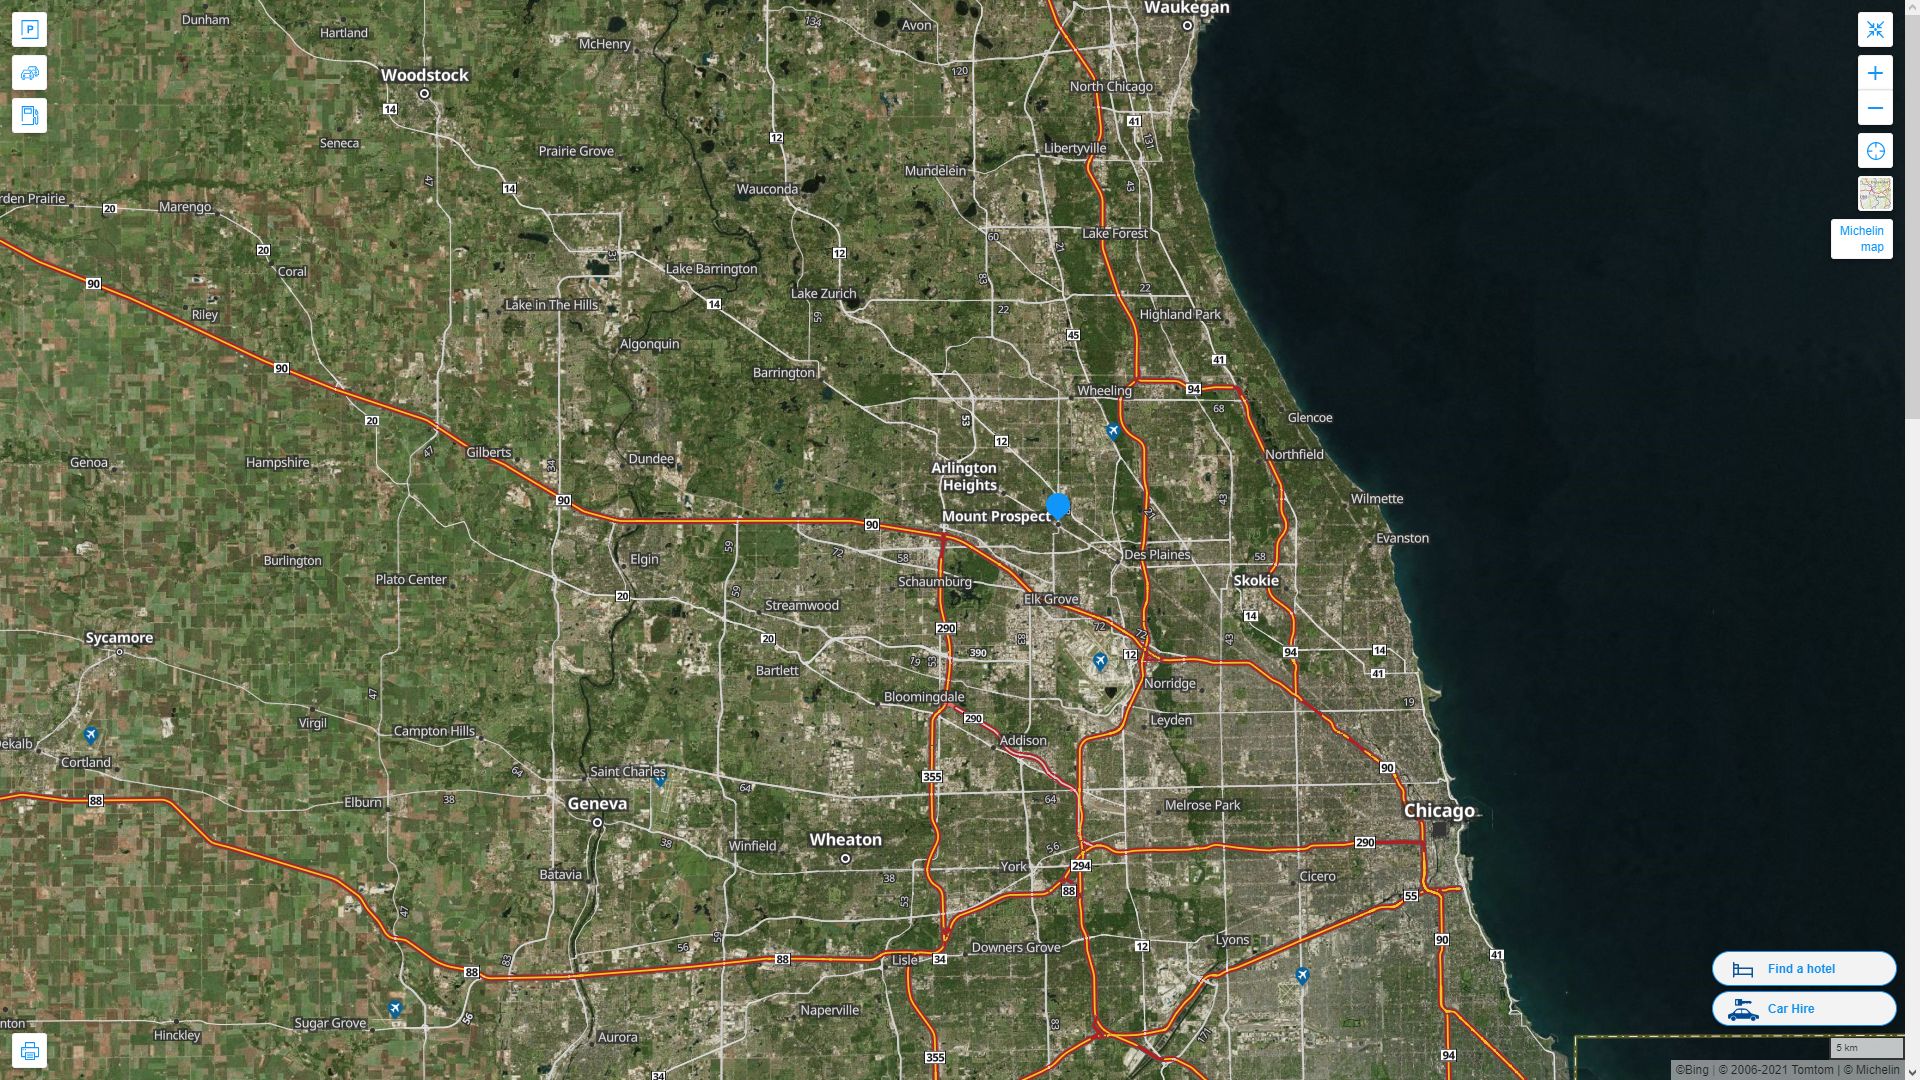 Mount Prospect illinois Highway and Road Map with Satellite View